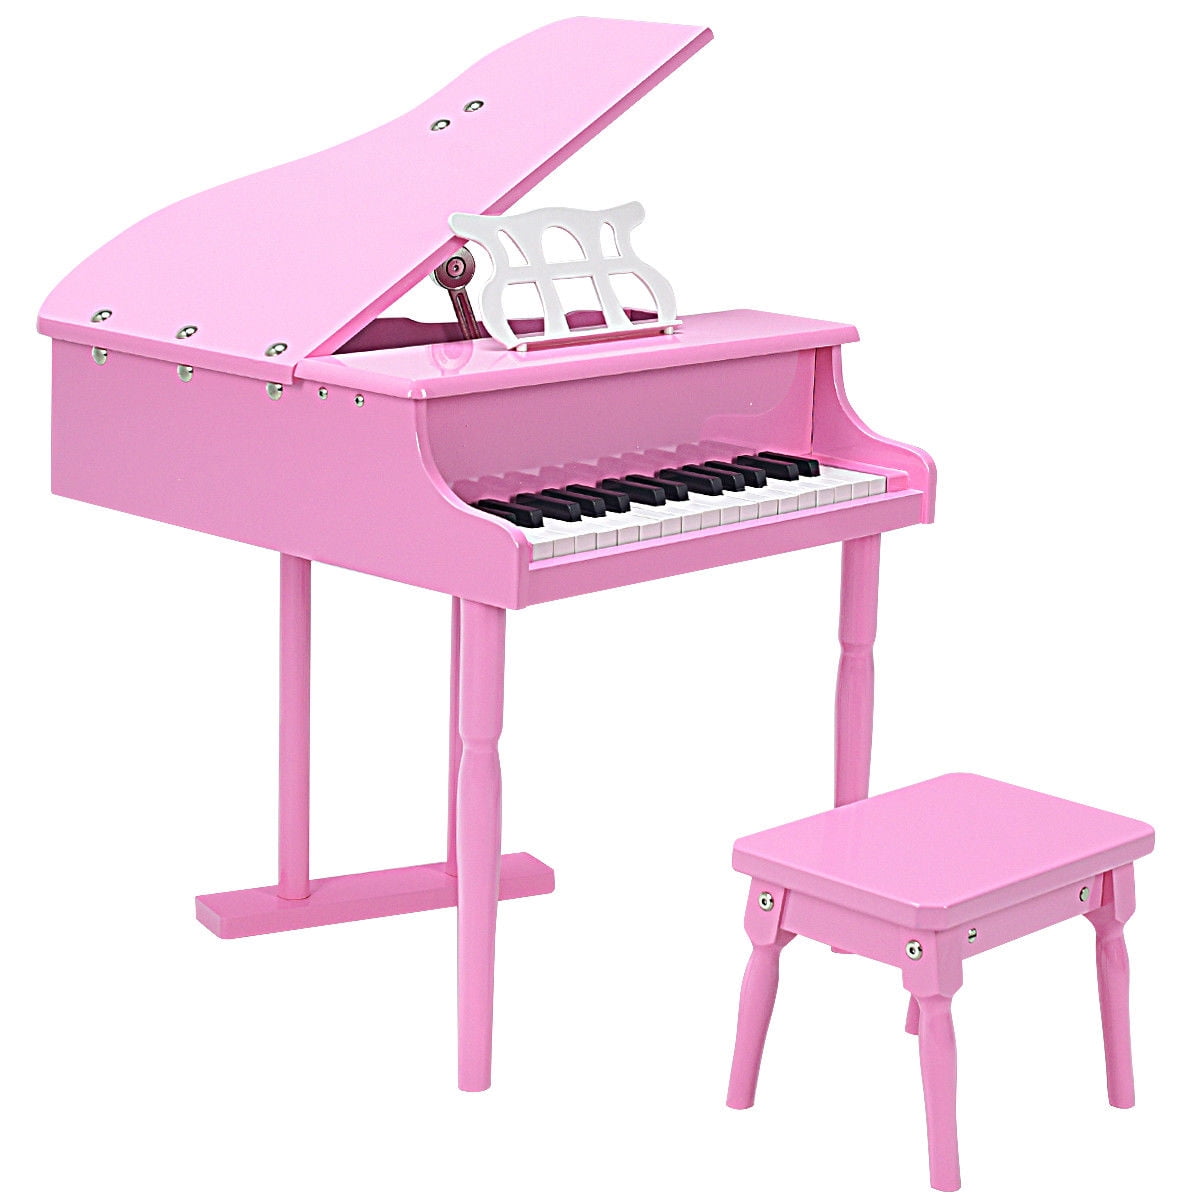 E0319 Hape Happy Grand Piano Pink Wooden Early Melodies Toddler Children 3yrs for sale online 